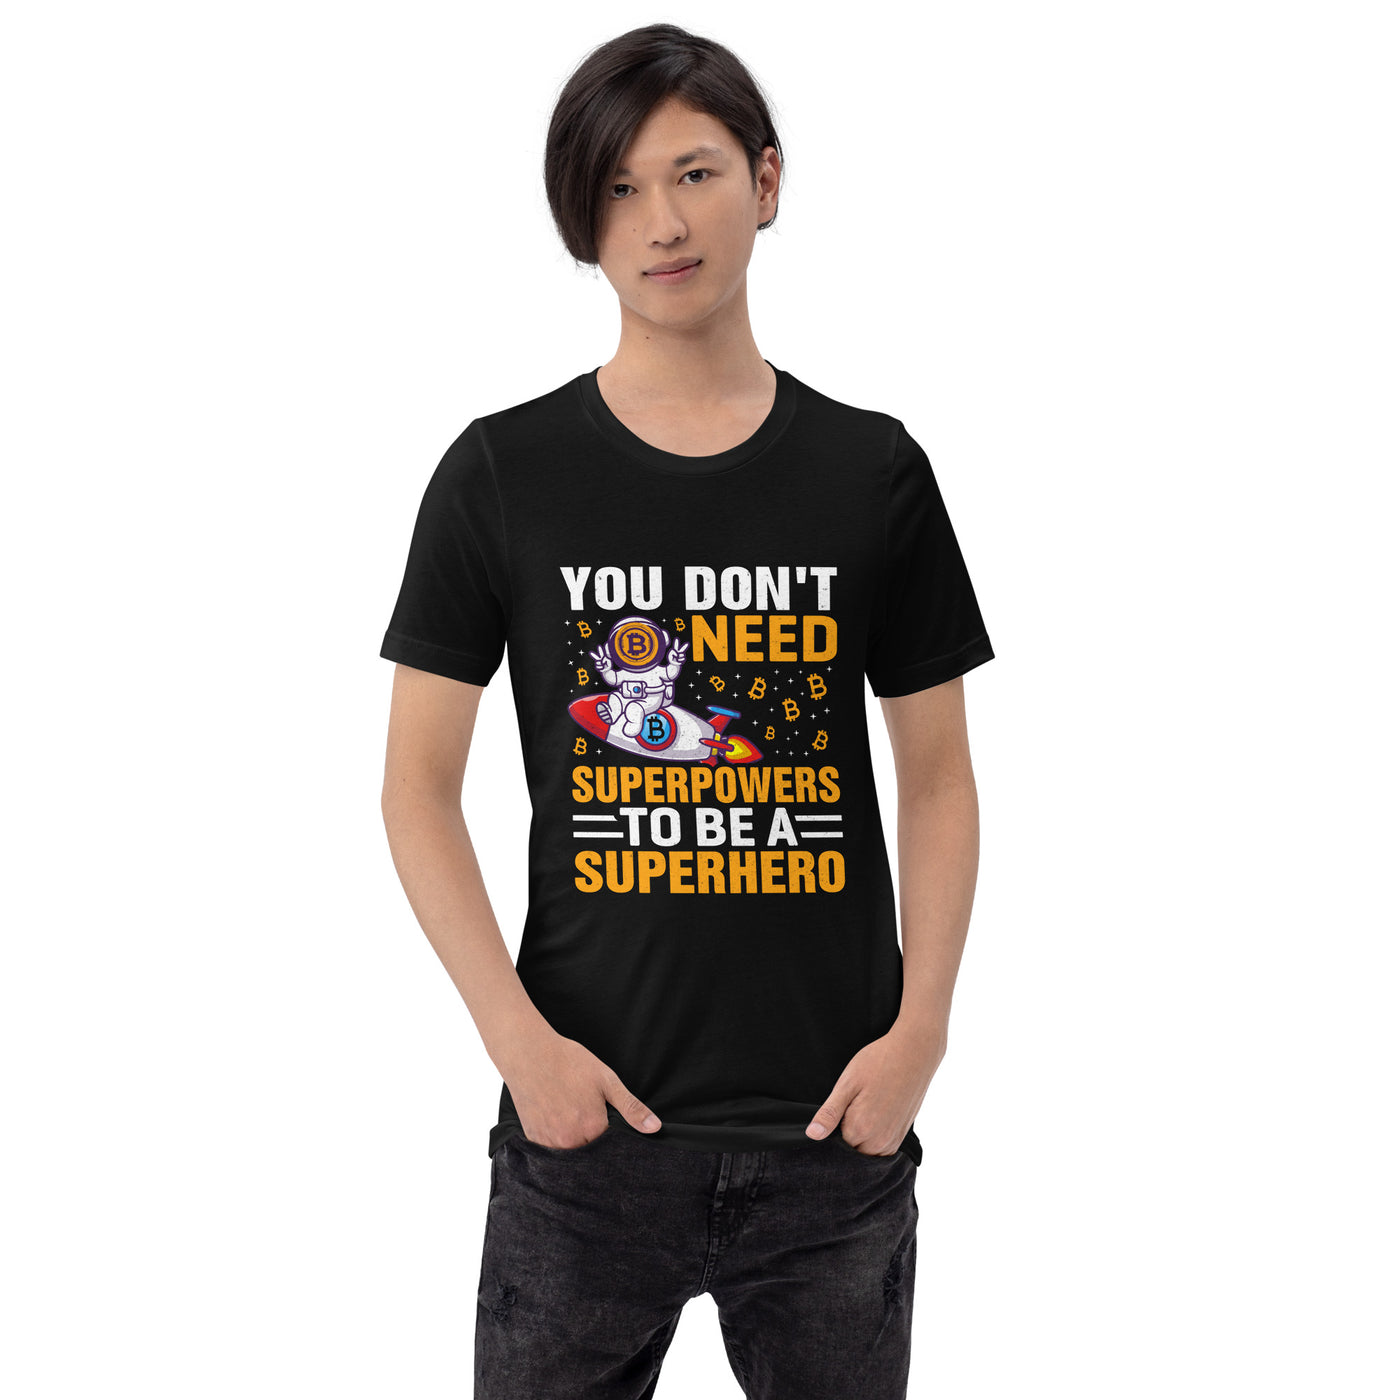 I am not a Player, I am a Gamer, Players get Chicks, I get Bullied at School - Unisex t-shirt